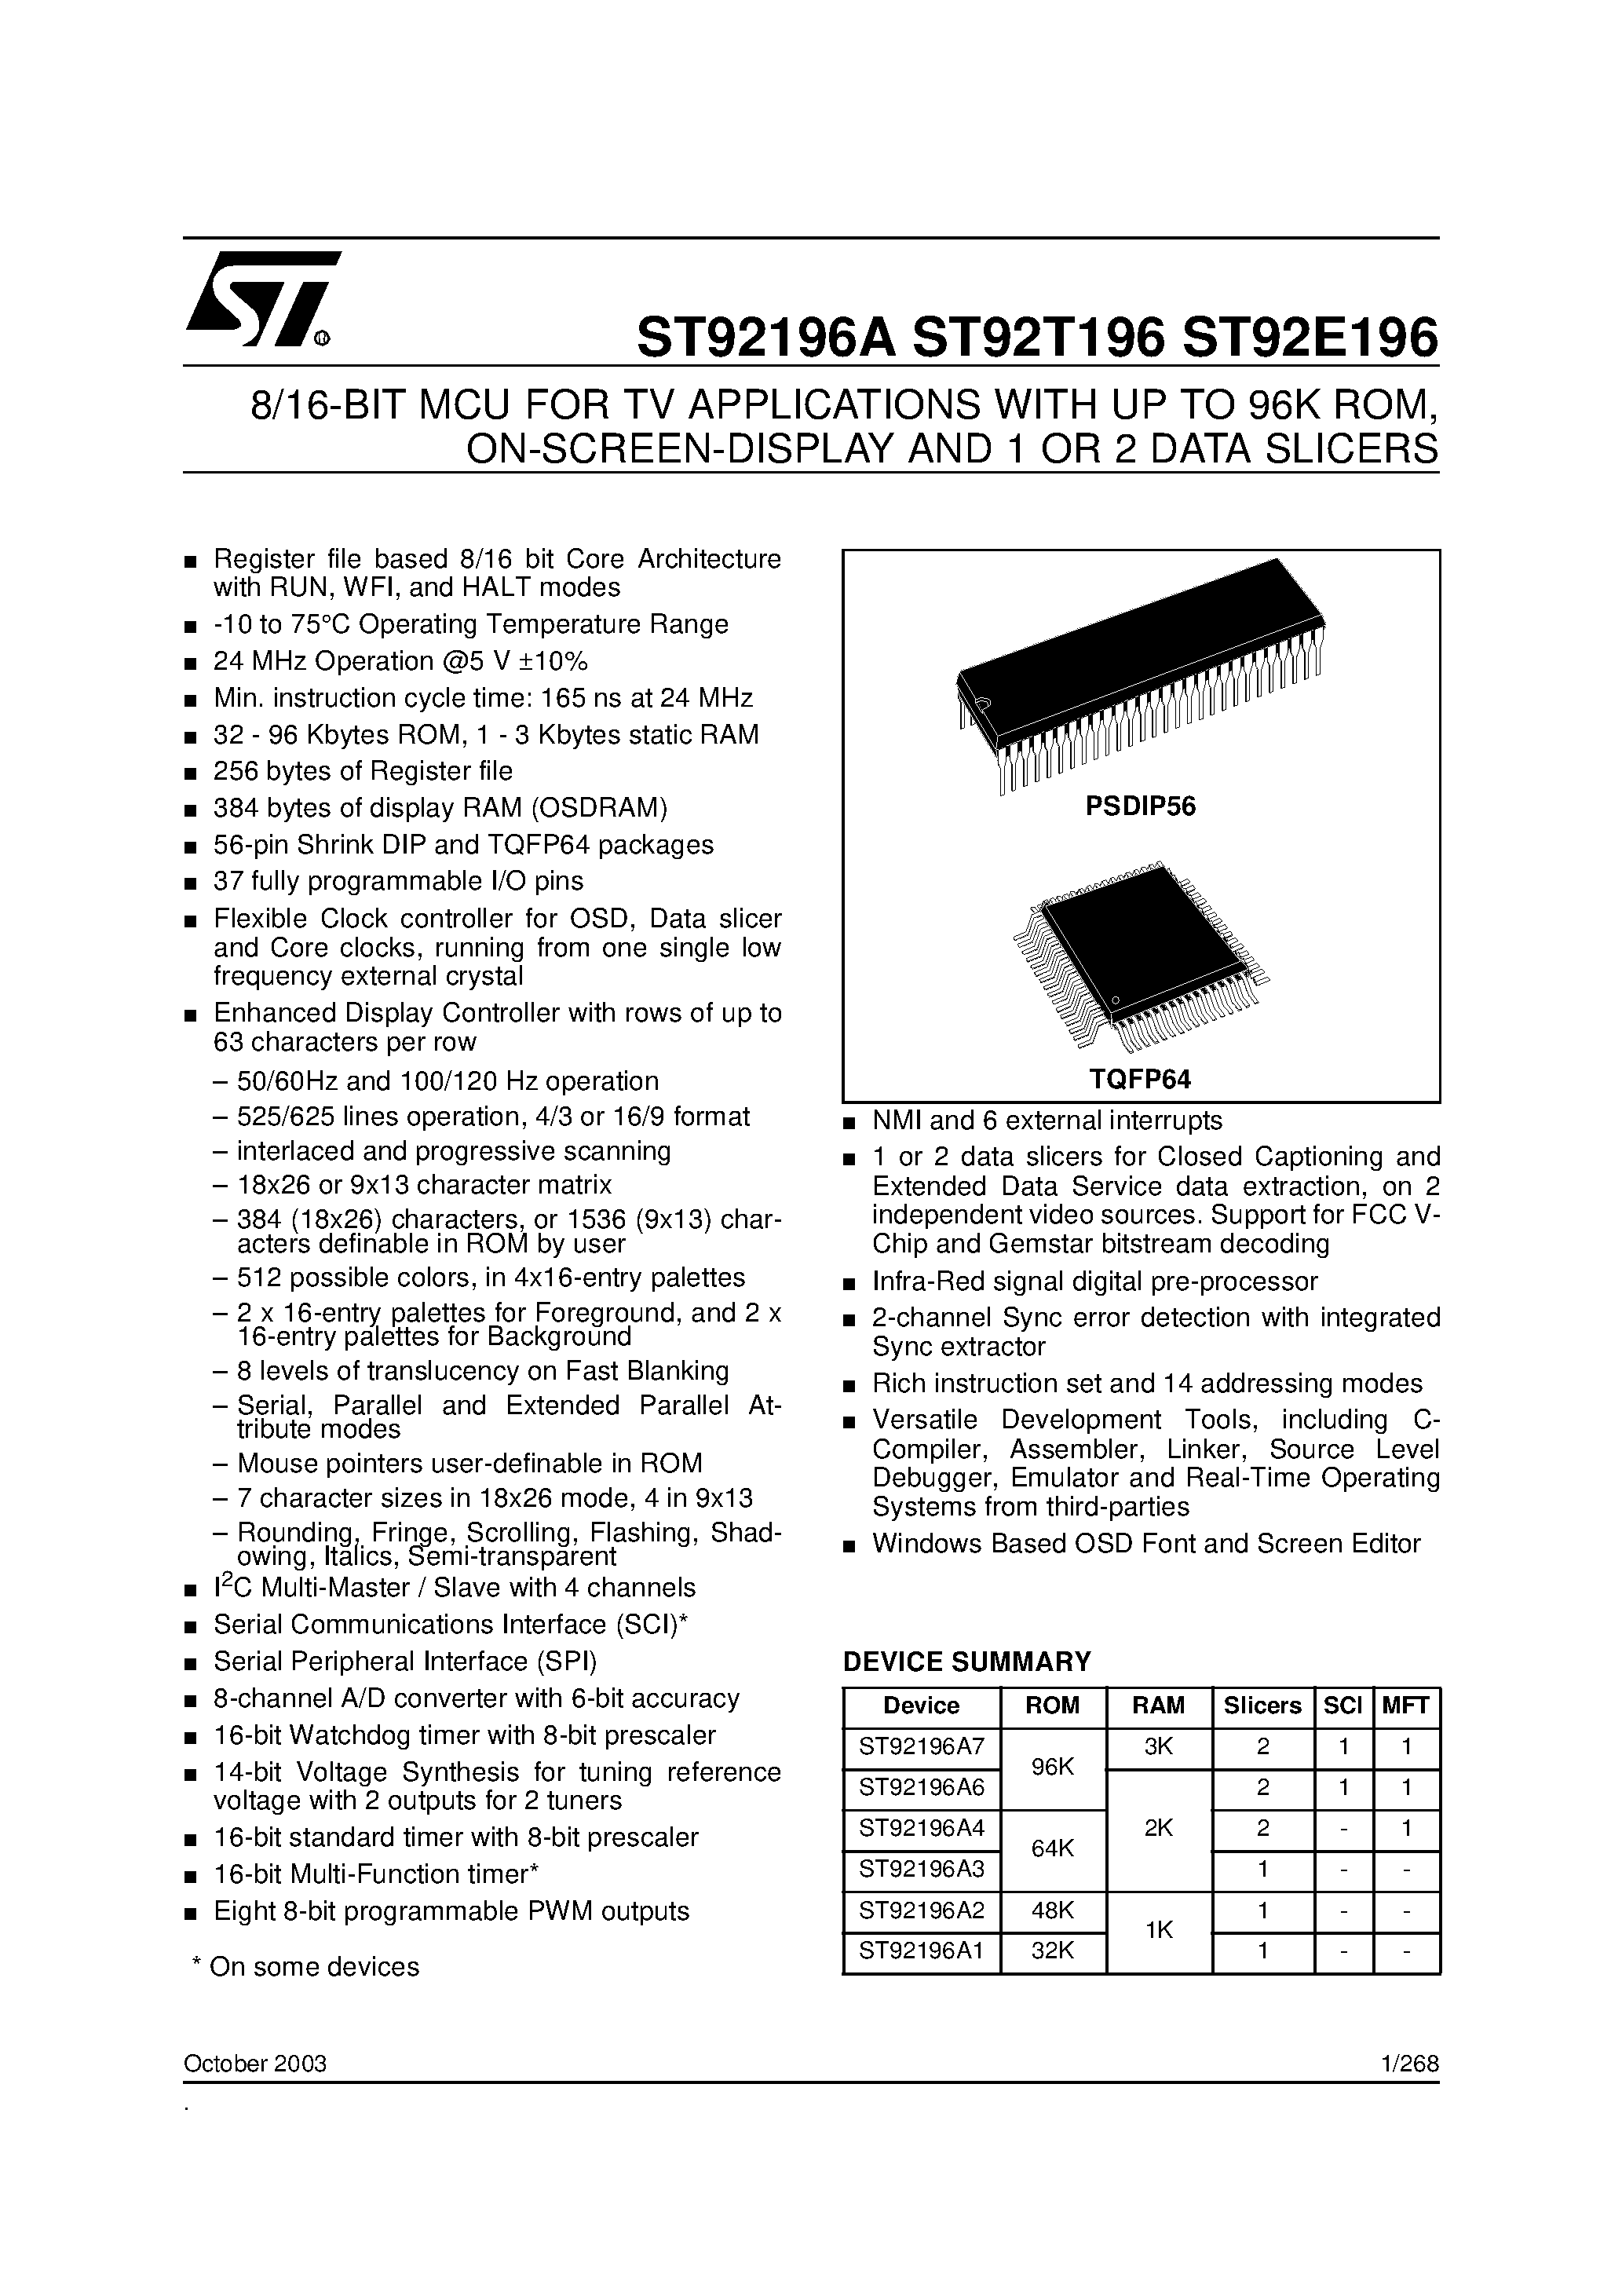 Datasheet ST92T196 - 8/16-BIT MCU FOR TV APPLICATIONS WITH UP TO 96K ROM page 1